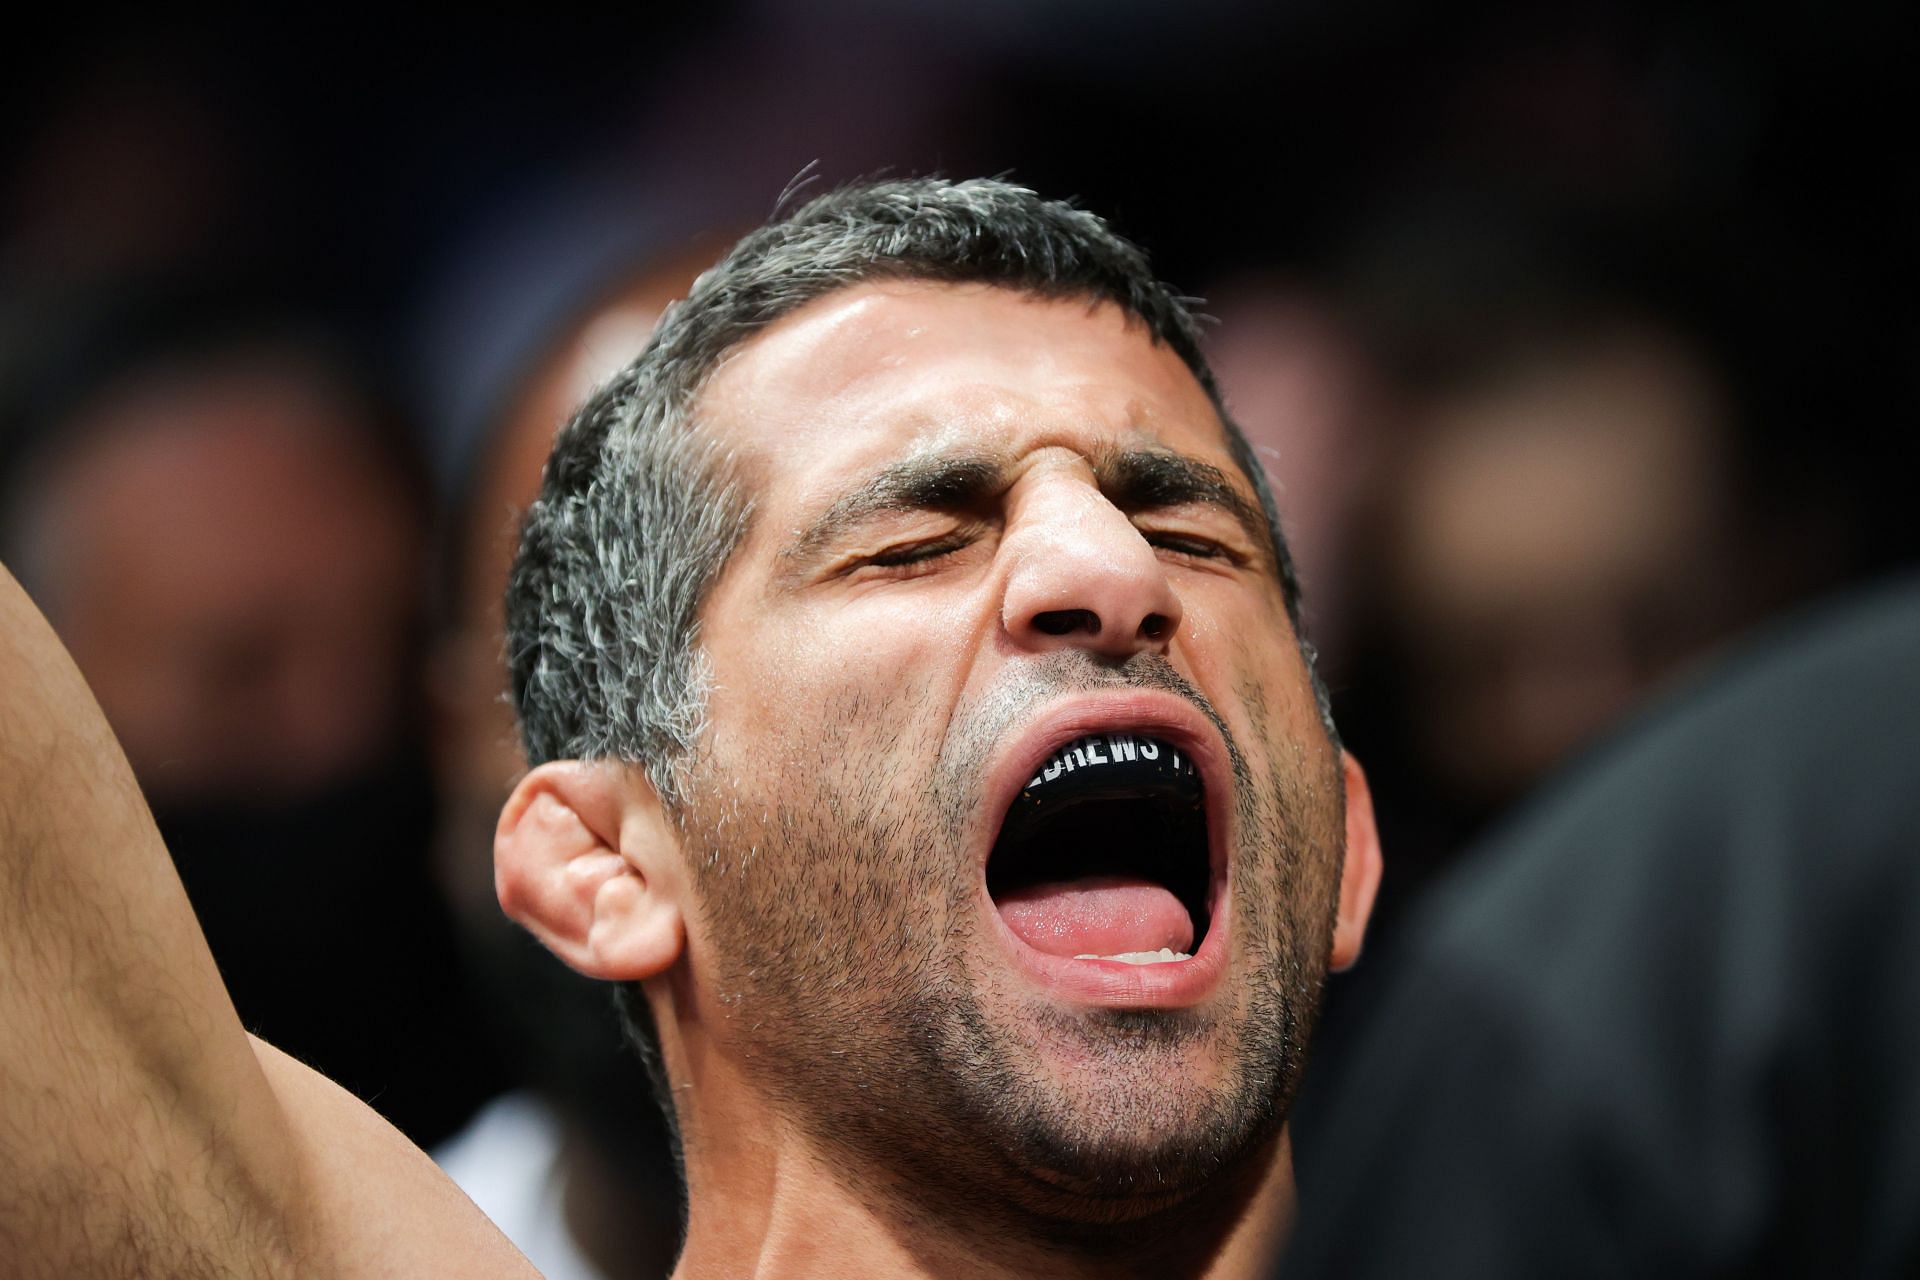 What kind of fighter is Beneil Dariush?